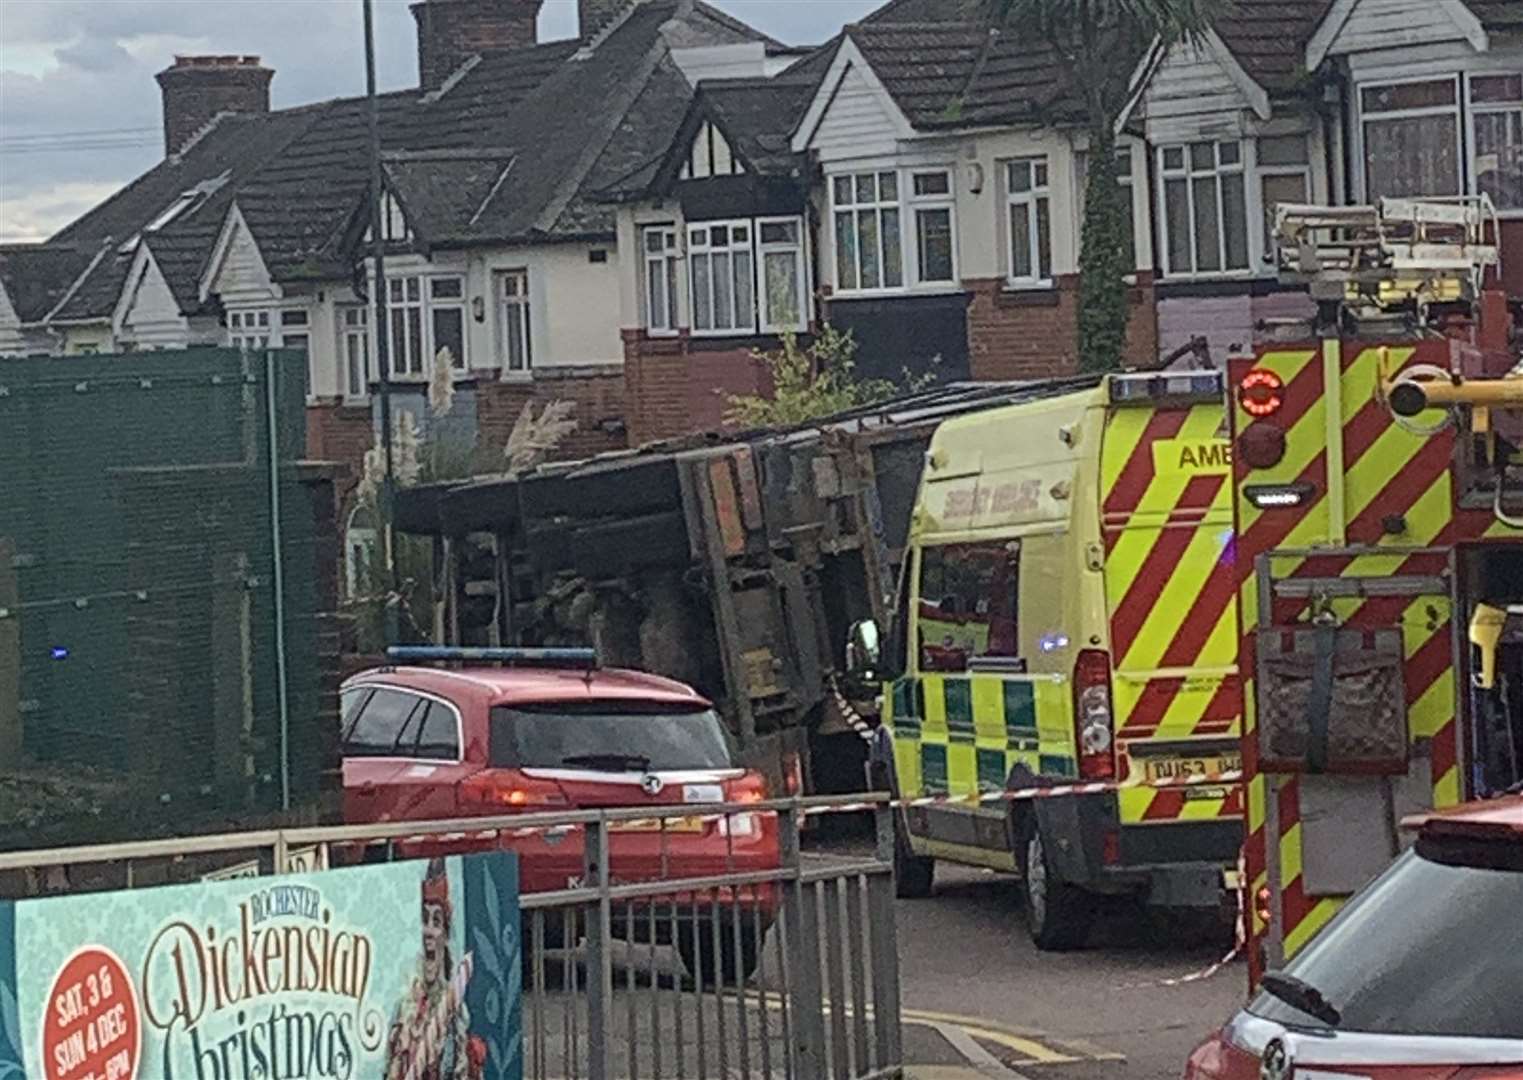 A lorry is on its side in Station Road